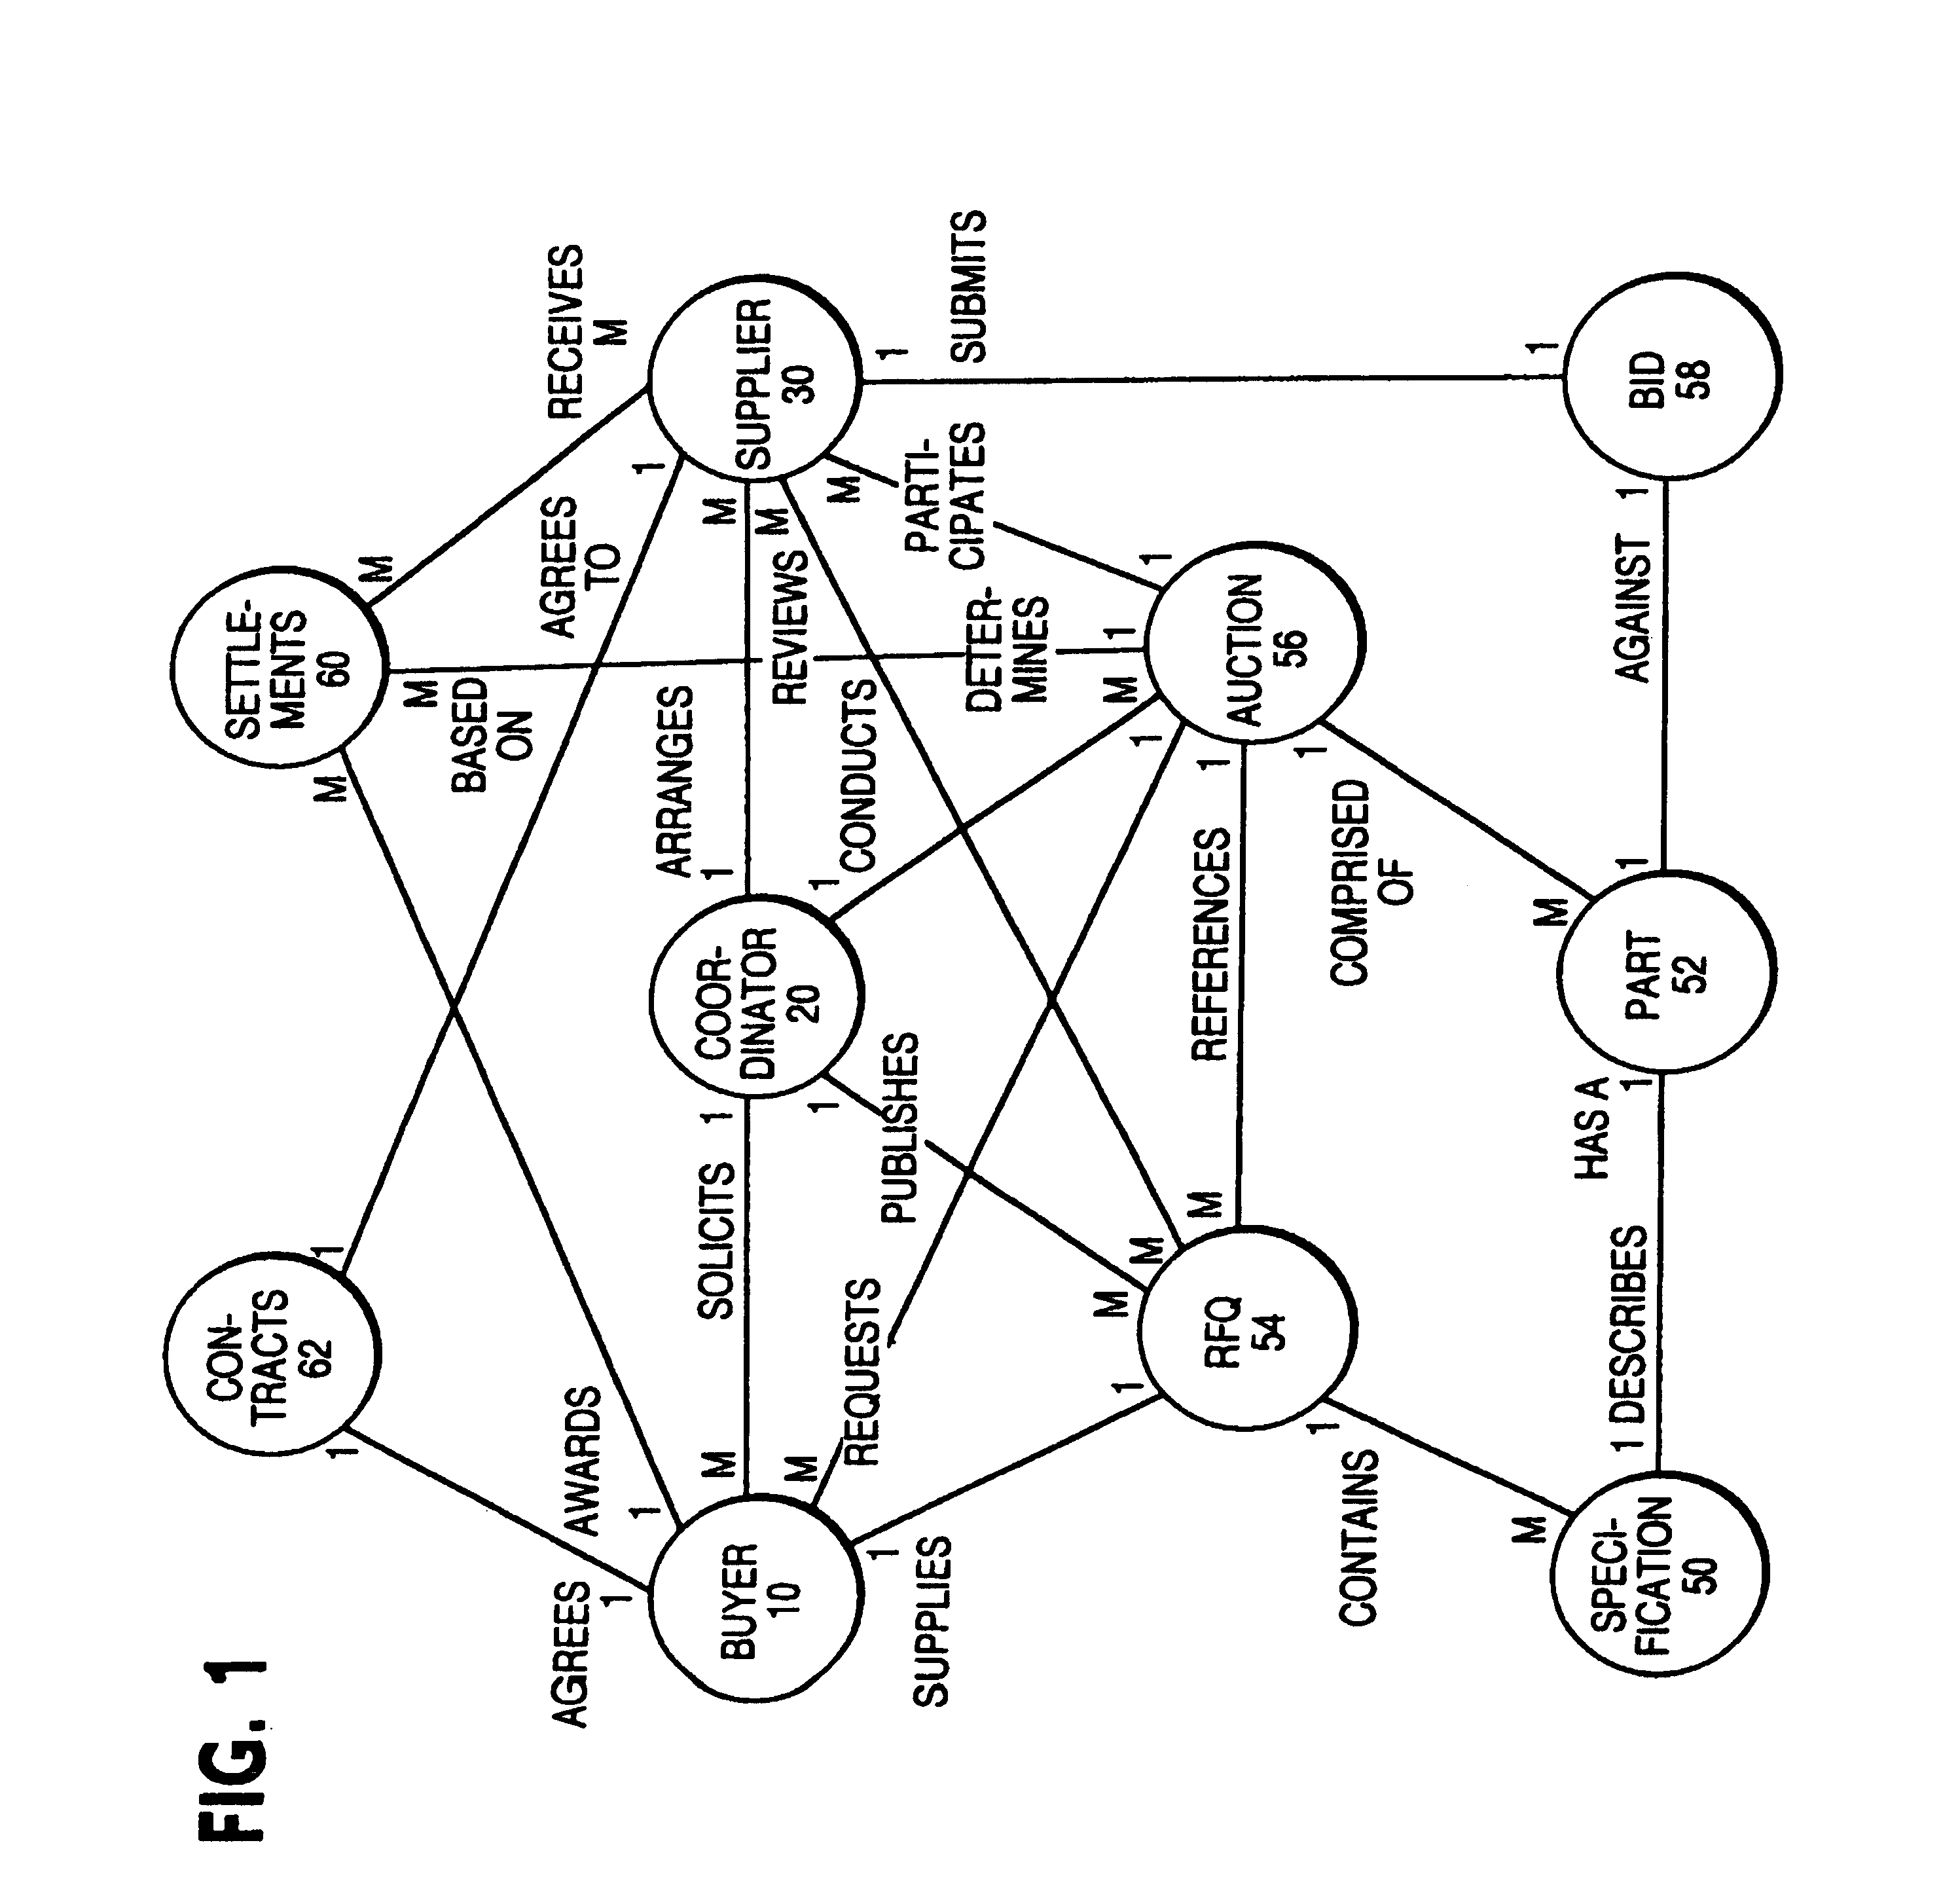 Method and system for conducting electronic auctions with net present value bidding